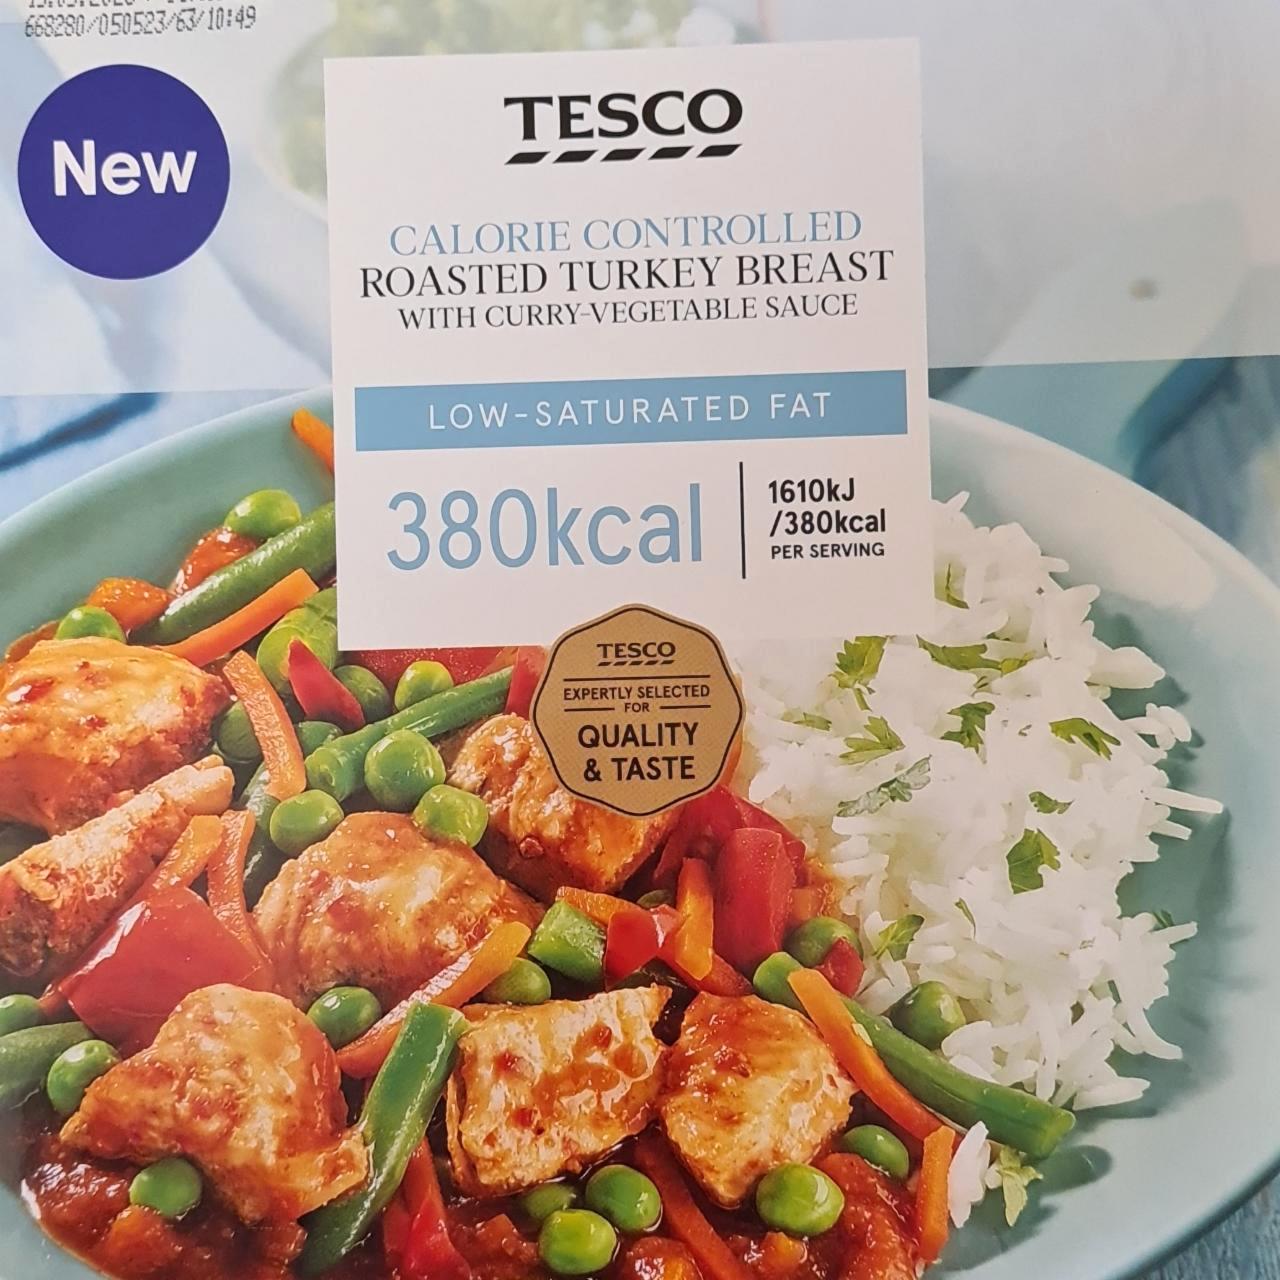 Fotografie - Calorie Controlled Roasted Turkey Breast with Curry Vegetable Sauce Tesco